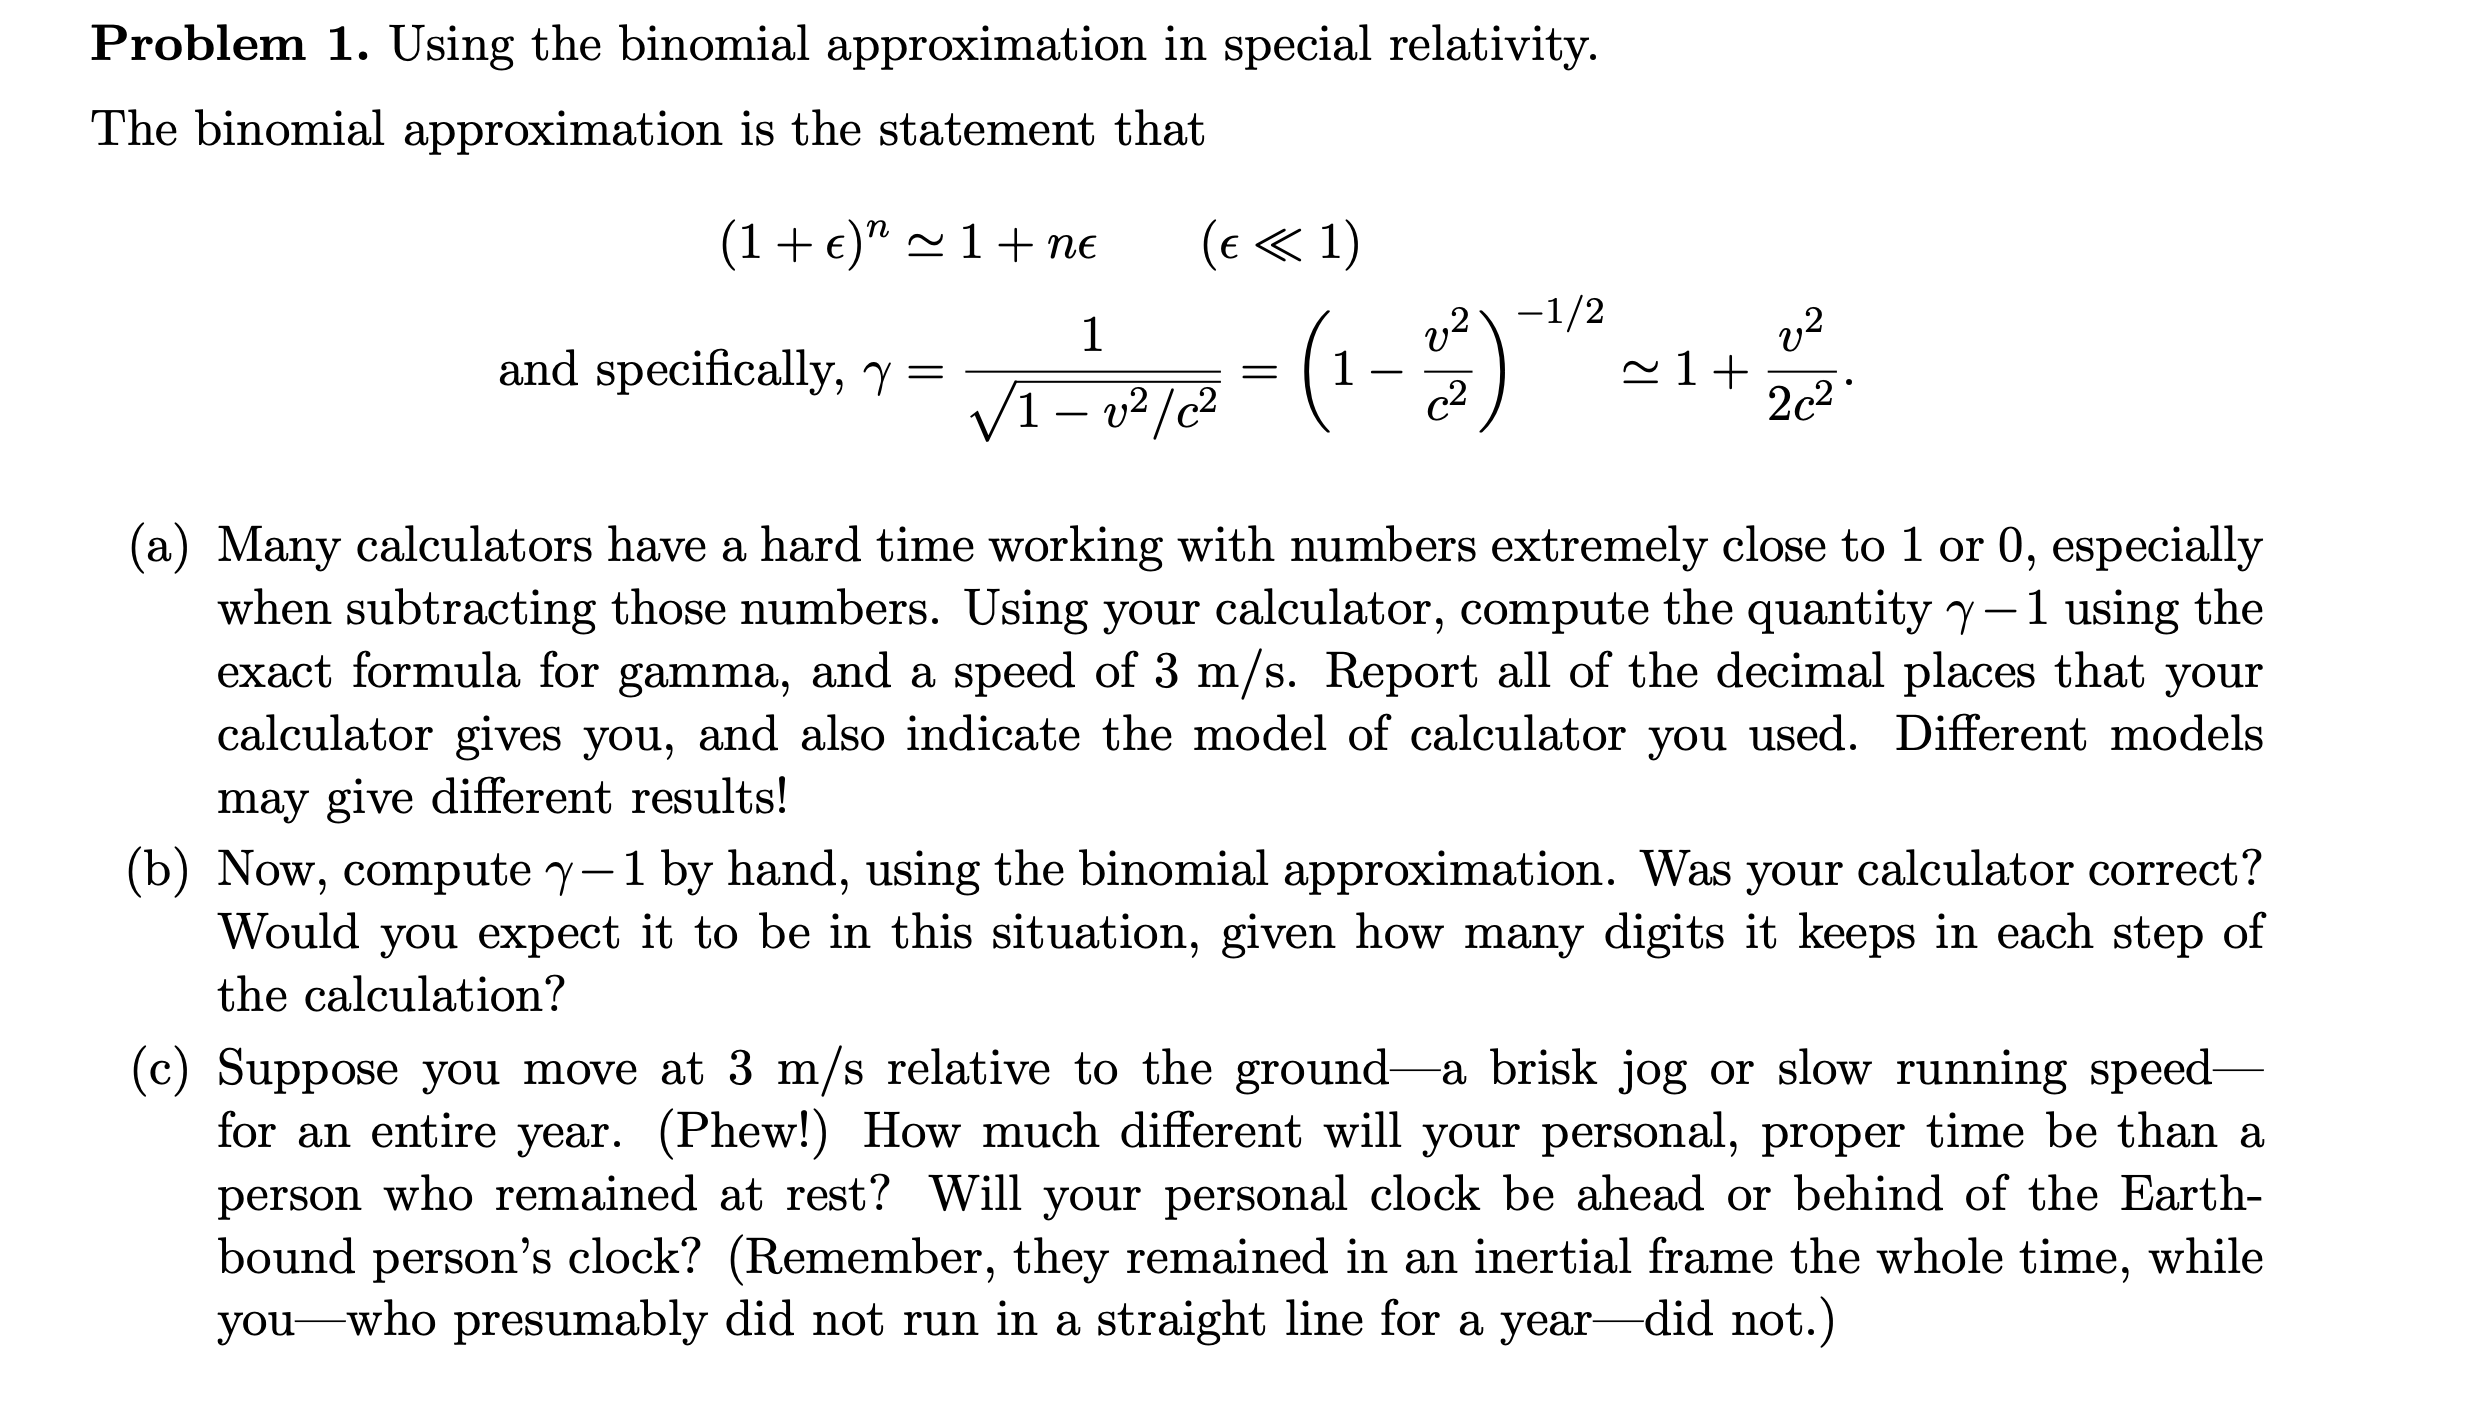 Problem 1. Using the binomial approximation in special relativity.
The binomial approximation is the statement that
(1+ €)" ~ 1 + ne
(e « 1)
v2\ -1/2
v2
and specifically, y =
V1- v²/c²
c2
2c2
(a) Many calculators have a hard time working with numbers extremely close to 1 or 0, especially
when subtracting those numbers. Using your calculator, compute the quantity y-1 using the
exact formula for gamma, and a speed of 3 m/s. Report all of the decimal places that your
calculator gives you, and also indicate the model of calculator you used. Different models
may give different results!
(b) Now, compute y-1 by hand, using the binomial approximation. Was your calculator correct?
Would you expect it to be in this situation, given how many digits it keeps in each step of
the calculation?
(c) Suppose you move at 3 m/s relative to the ground-a brisk jog or slow running speed-
for an entire year. (Phew!) How much different will your personal, proper time be than a
person who remained at rest? Will your personal clock be ahead or behind of the Earth-
bound person's clock? (Remember, they remained in an inertial frame the whole time, while
you-who presumably did not run in a straight line for a year-did not.)
